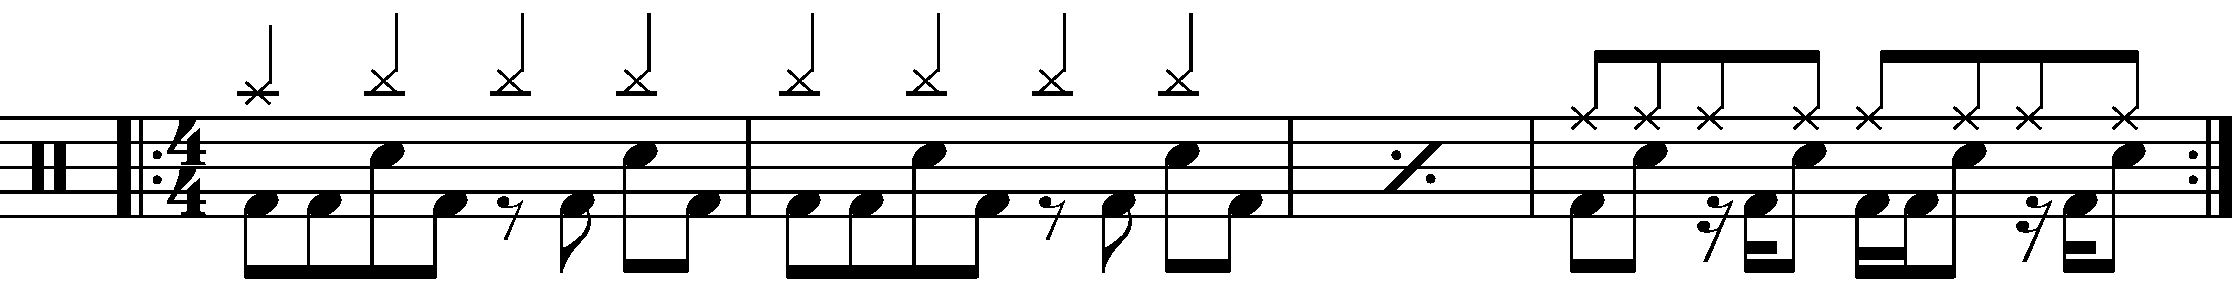 A four bar phrase using a double time groove as a fill